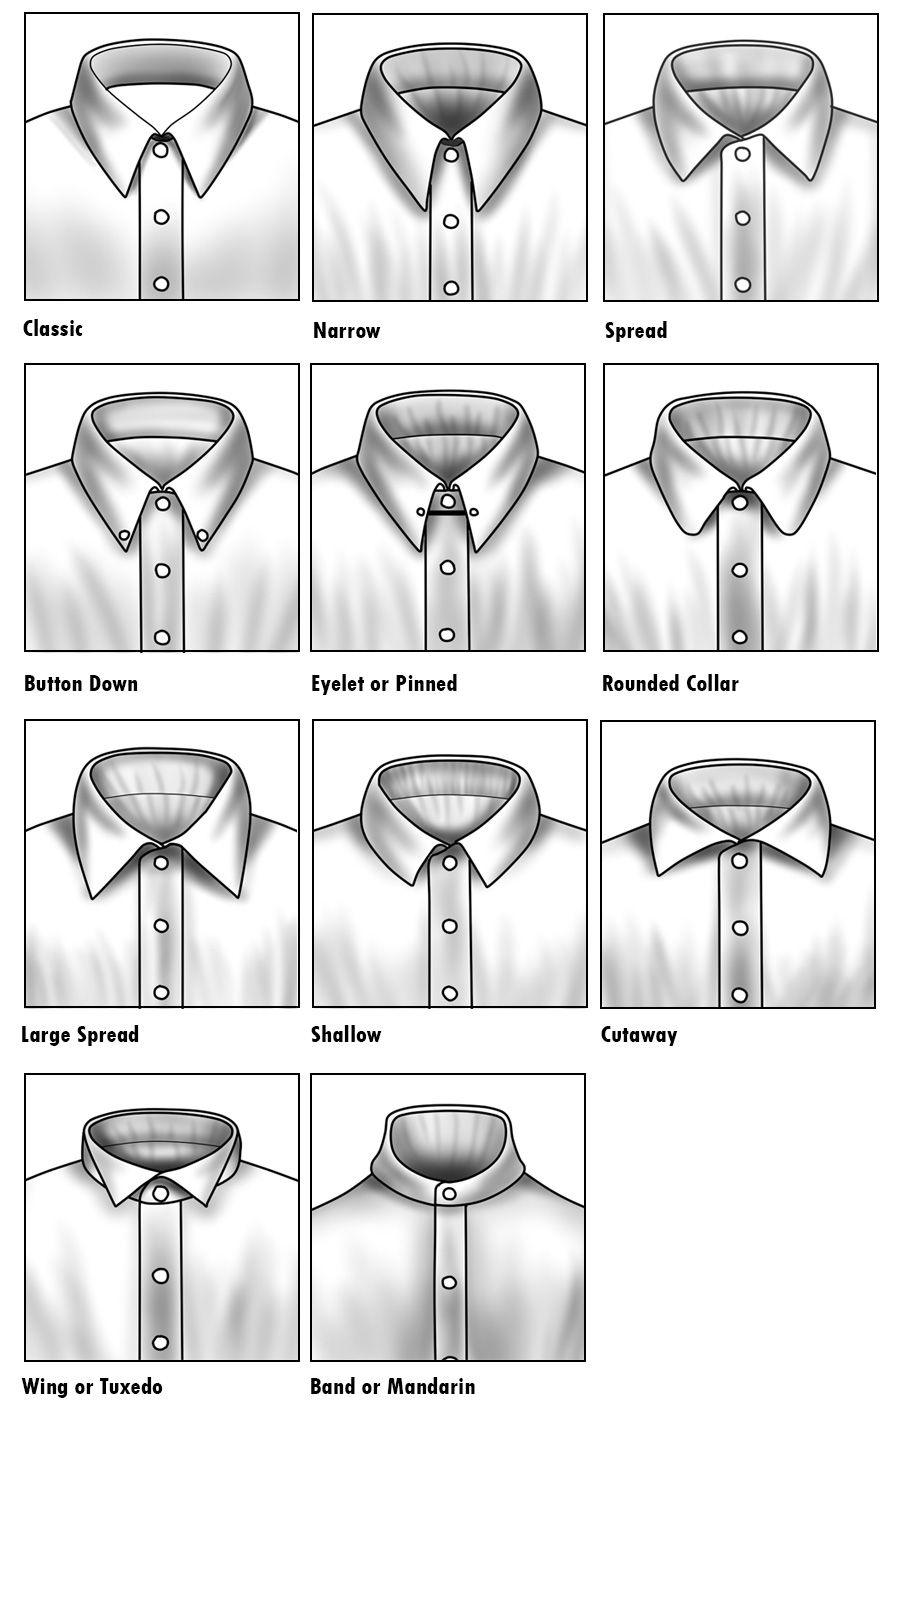 These Are the Only 6 Types of Shirt Collars Guys Should Wear